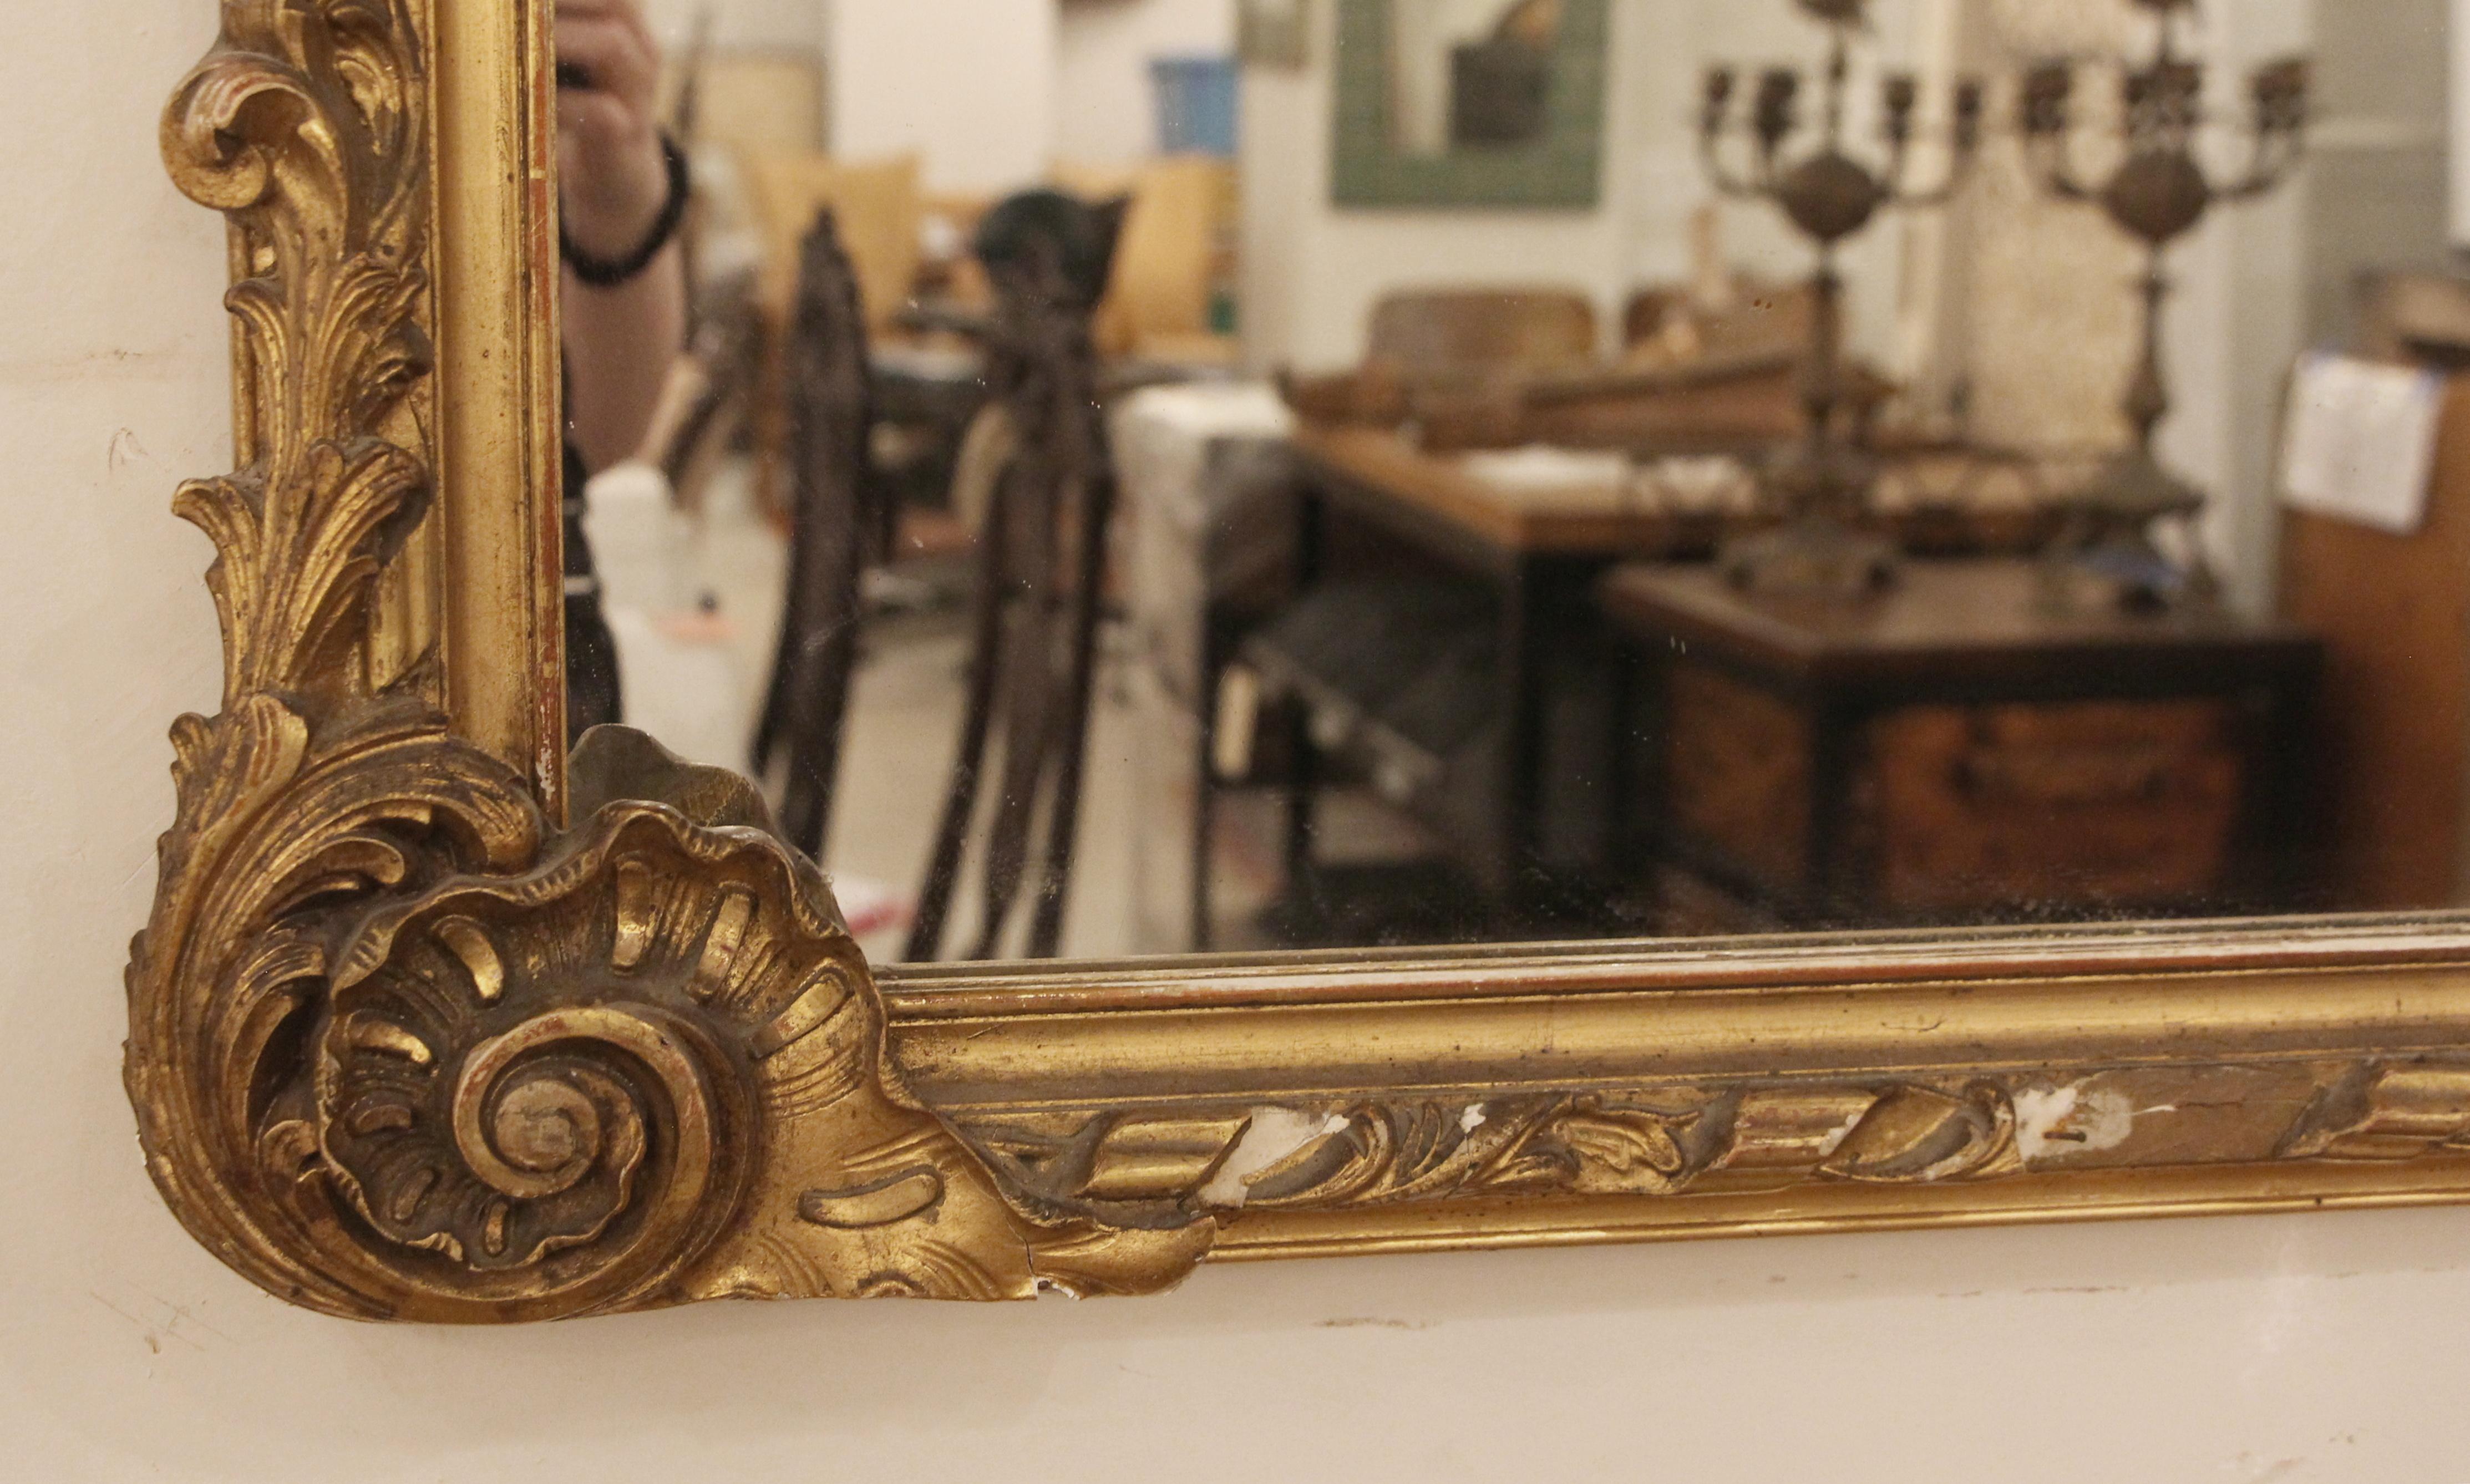 European 19th Century French Ornate Gold Gilt Mirror with Center Cartouche